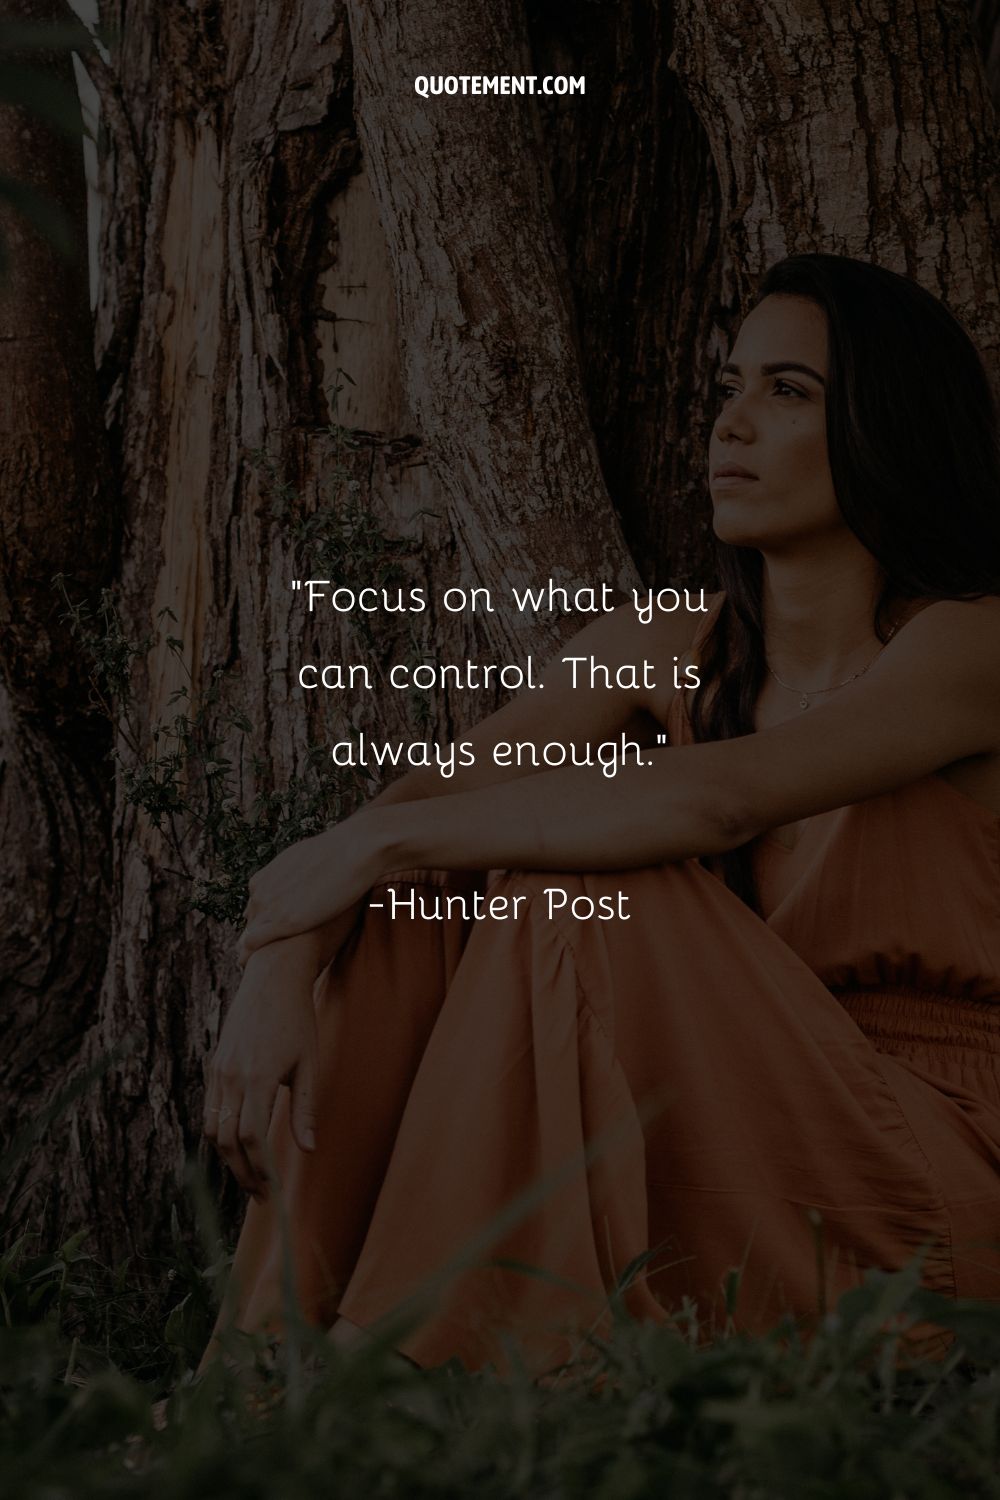 Focus on what you can control. That is always enough